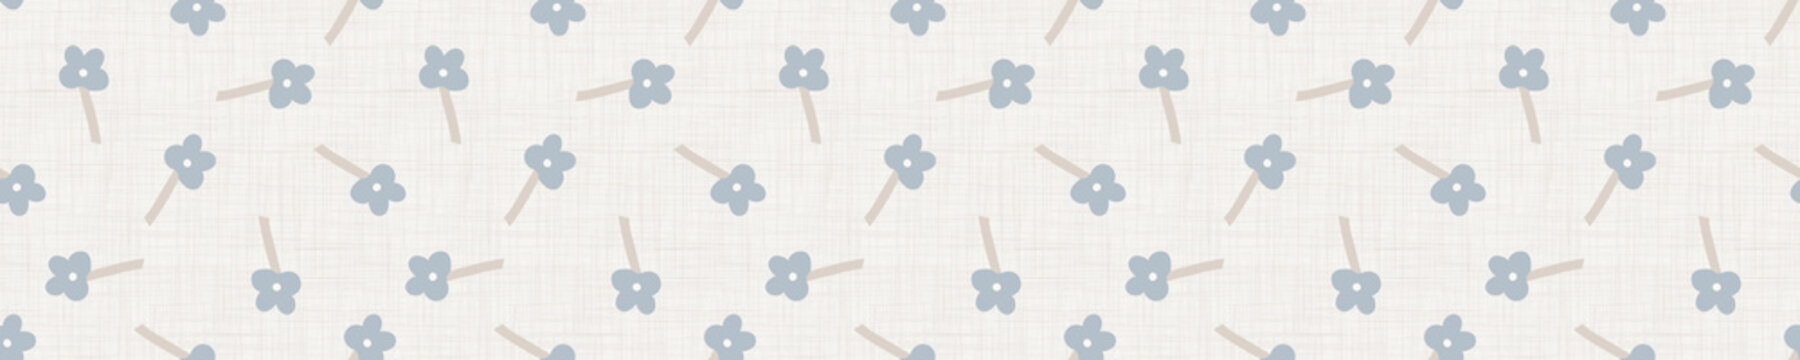 
Seamless tossed floral pattern in french blue linen shabby chic style. Hand drawn country bloom texture. Rustic woven background. Kitchen towel home decor swatch. Simple flower motif all over print